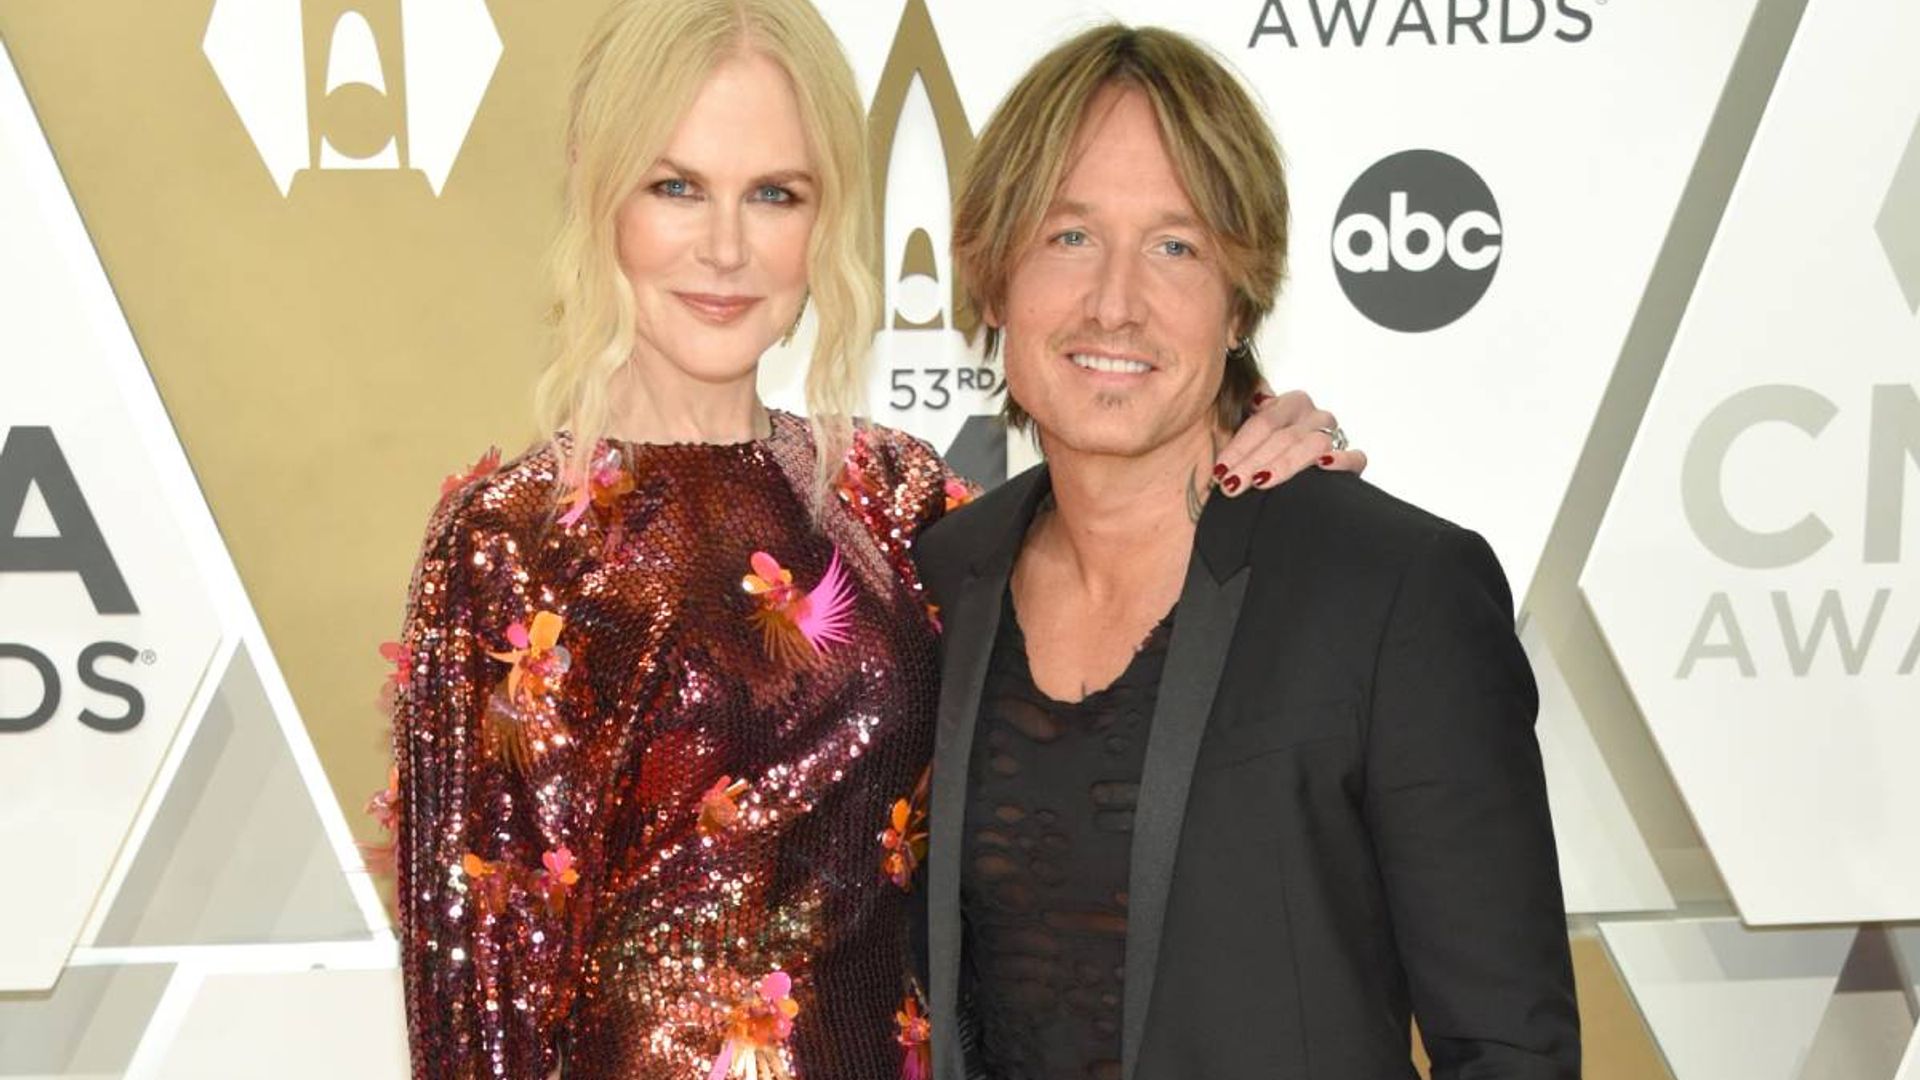 All you need to know about Keith Urban's special performance at the CMA Awards